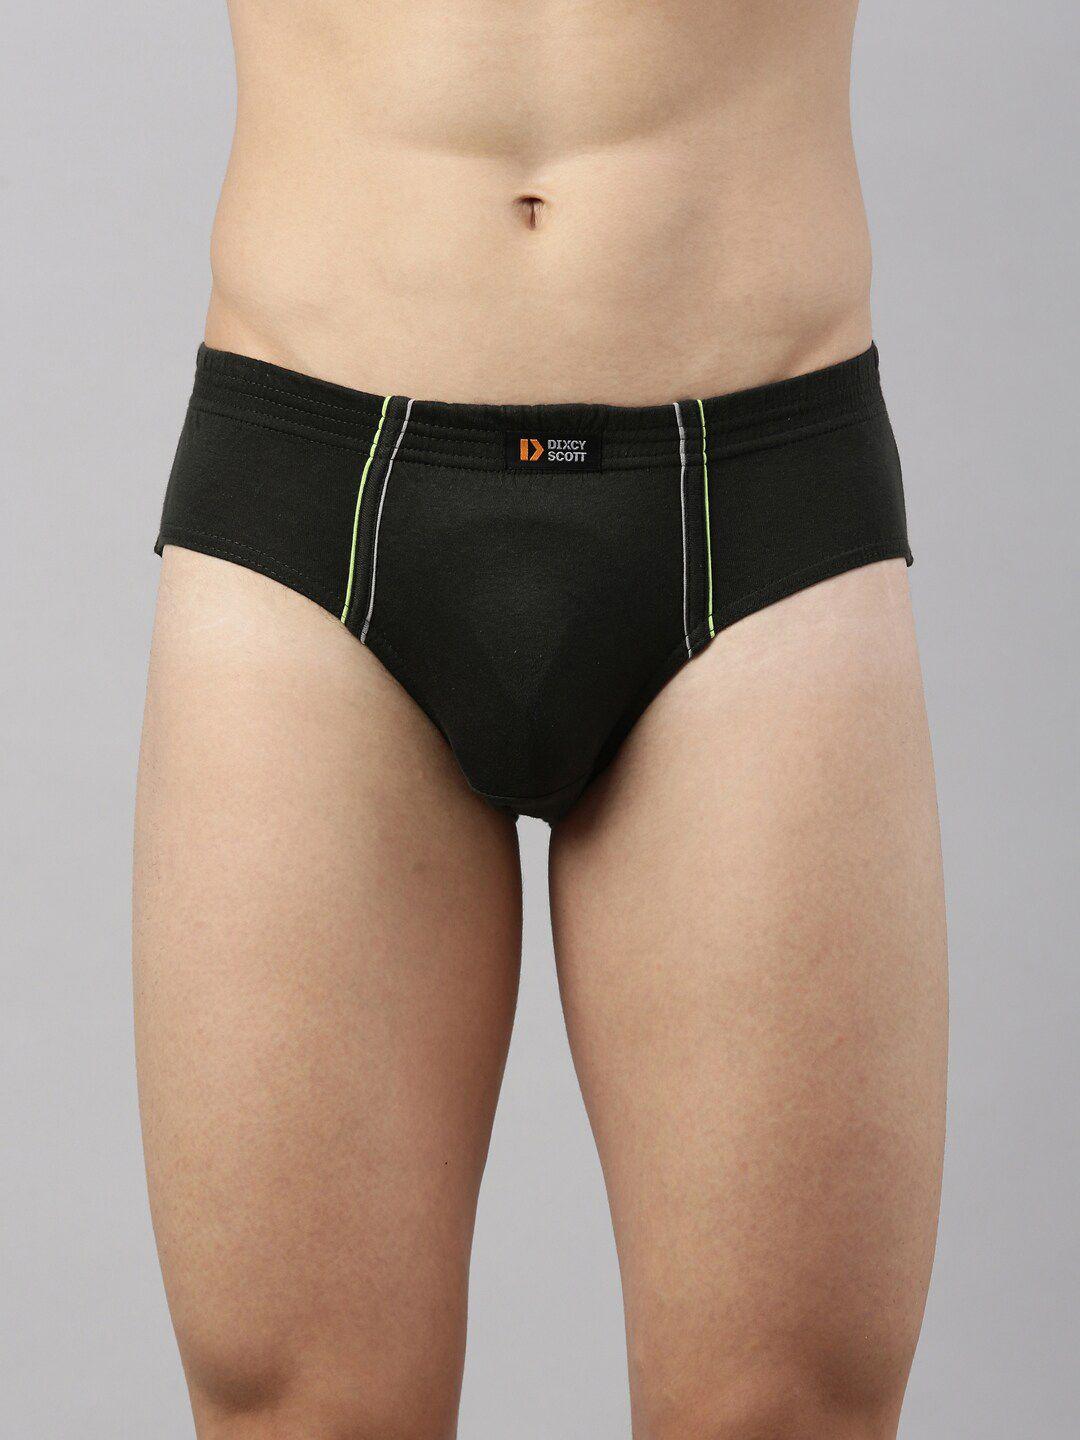 dixcy scott men olive-green solid pure cotton basic briefs